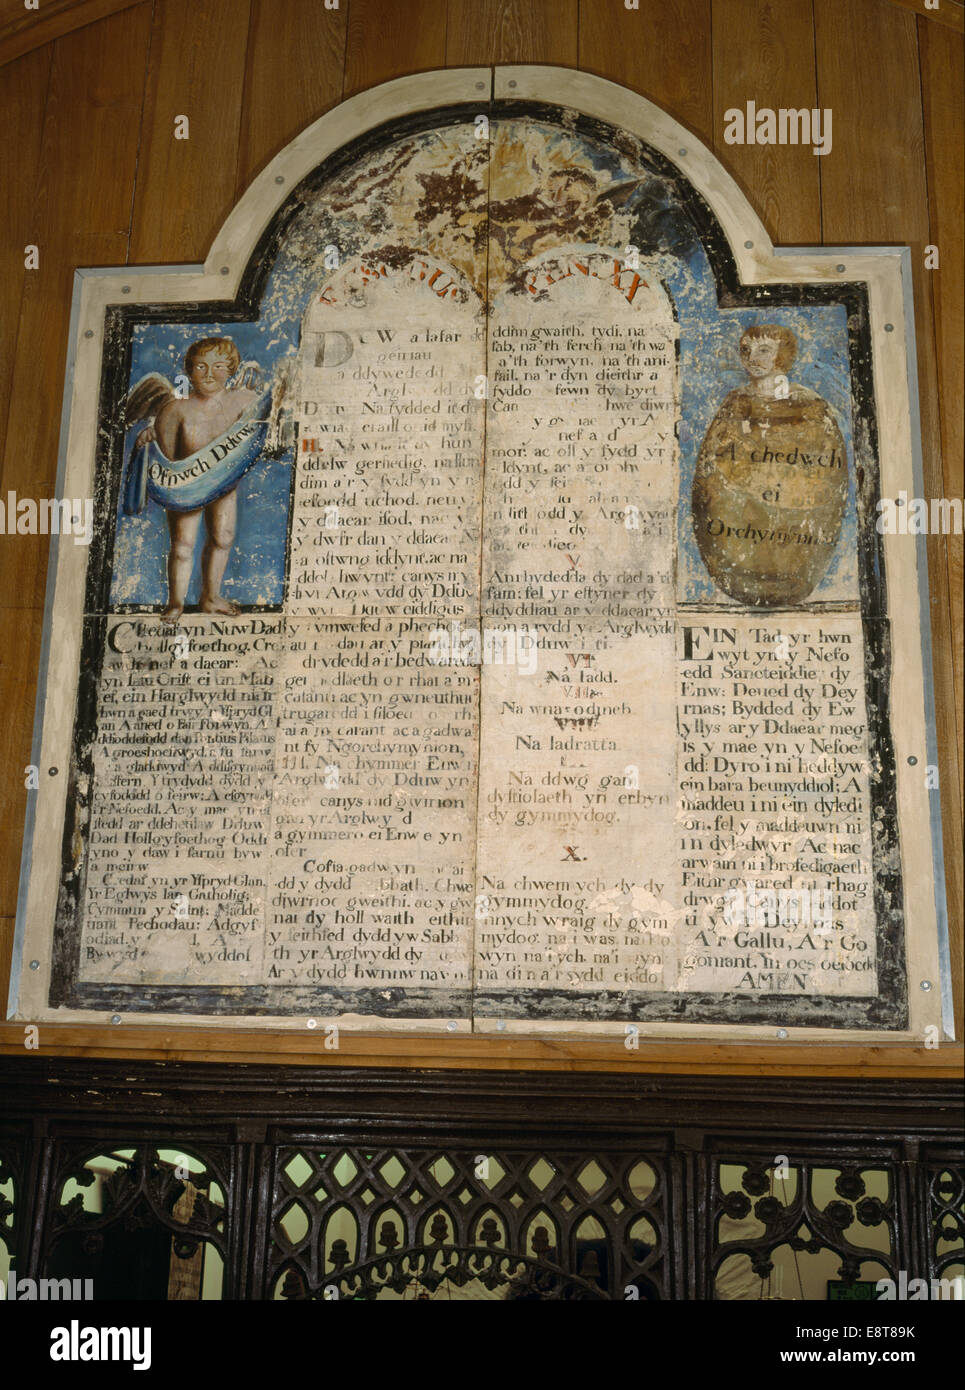 A conserved C18th wall painting of The Sentences: Lord's Prayer, Apostles' Creed & Ten Commandments (Decalogue) in Welsh at Pennant Melangell Church. Stock Photo